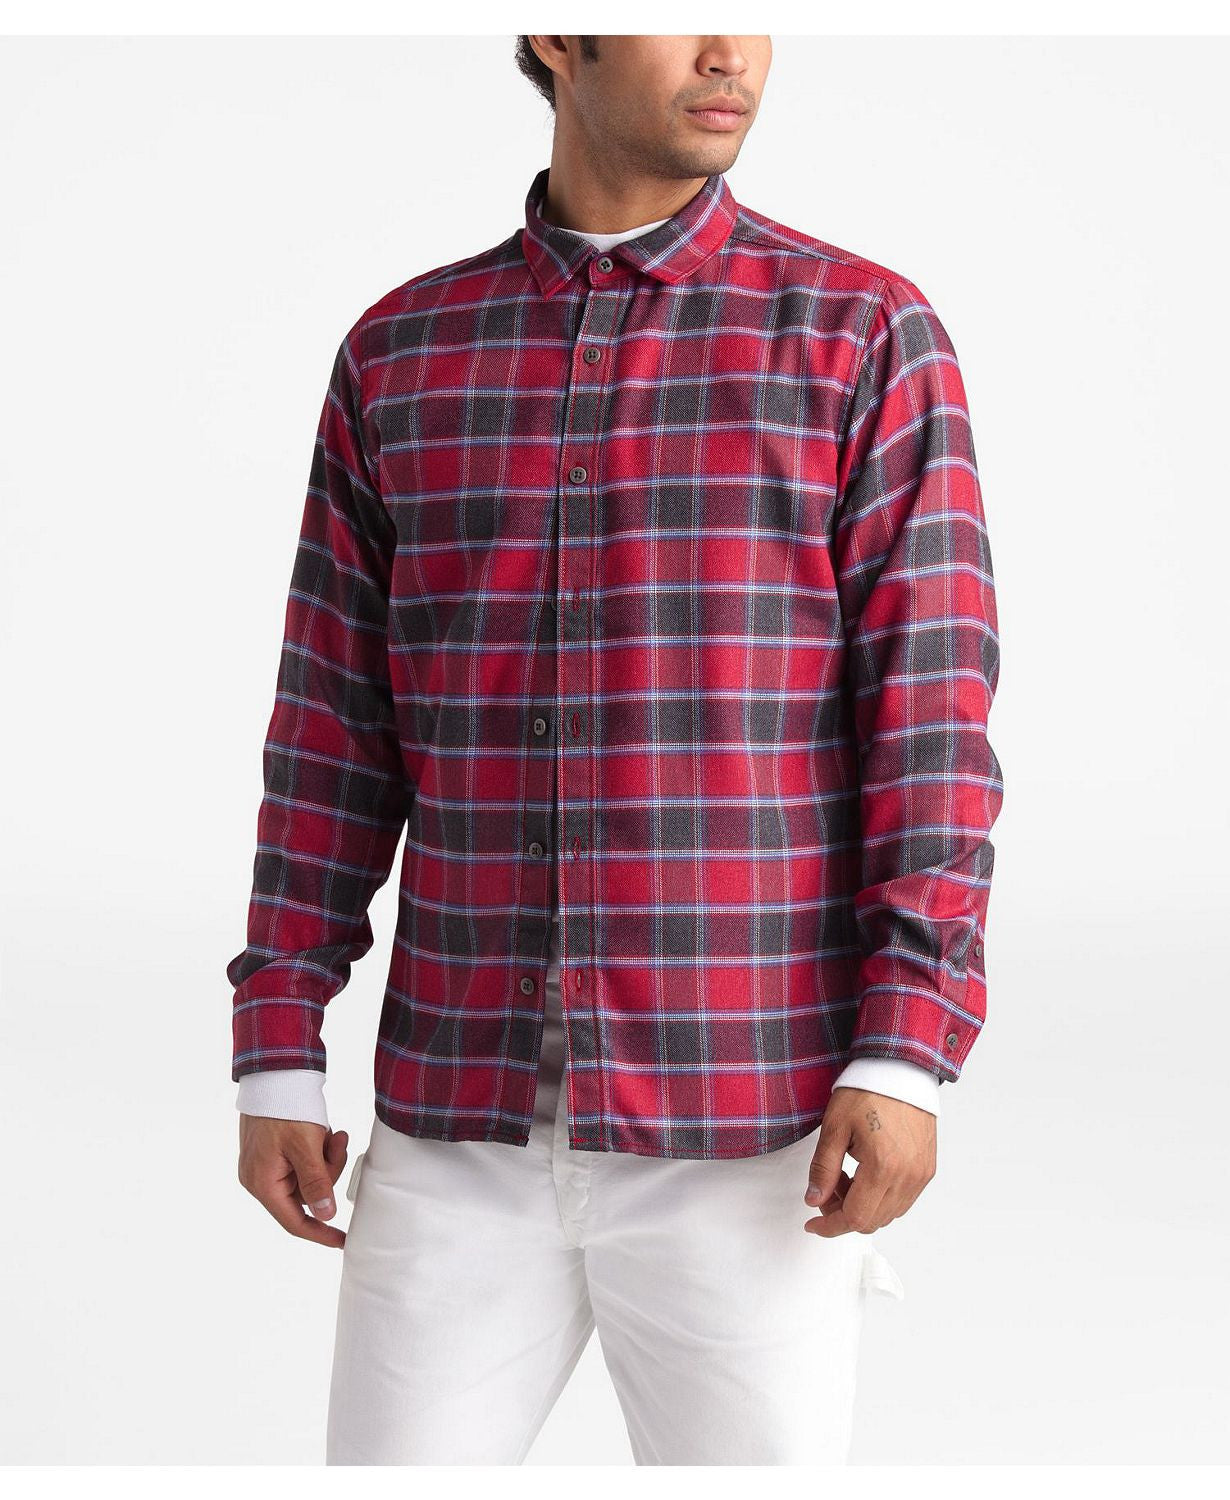 The North Face Thermocore Ls Shirt Cardinal Red Toast Plaid Wine